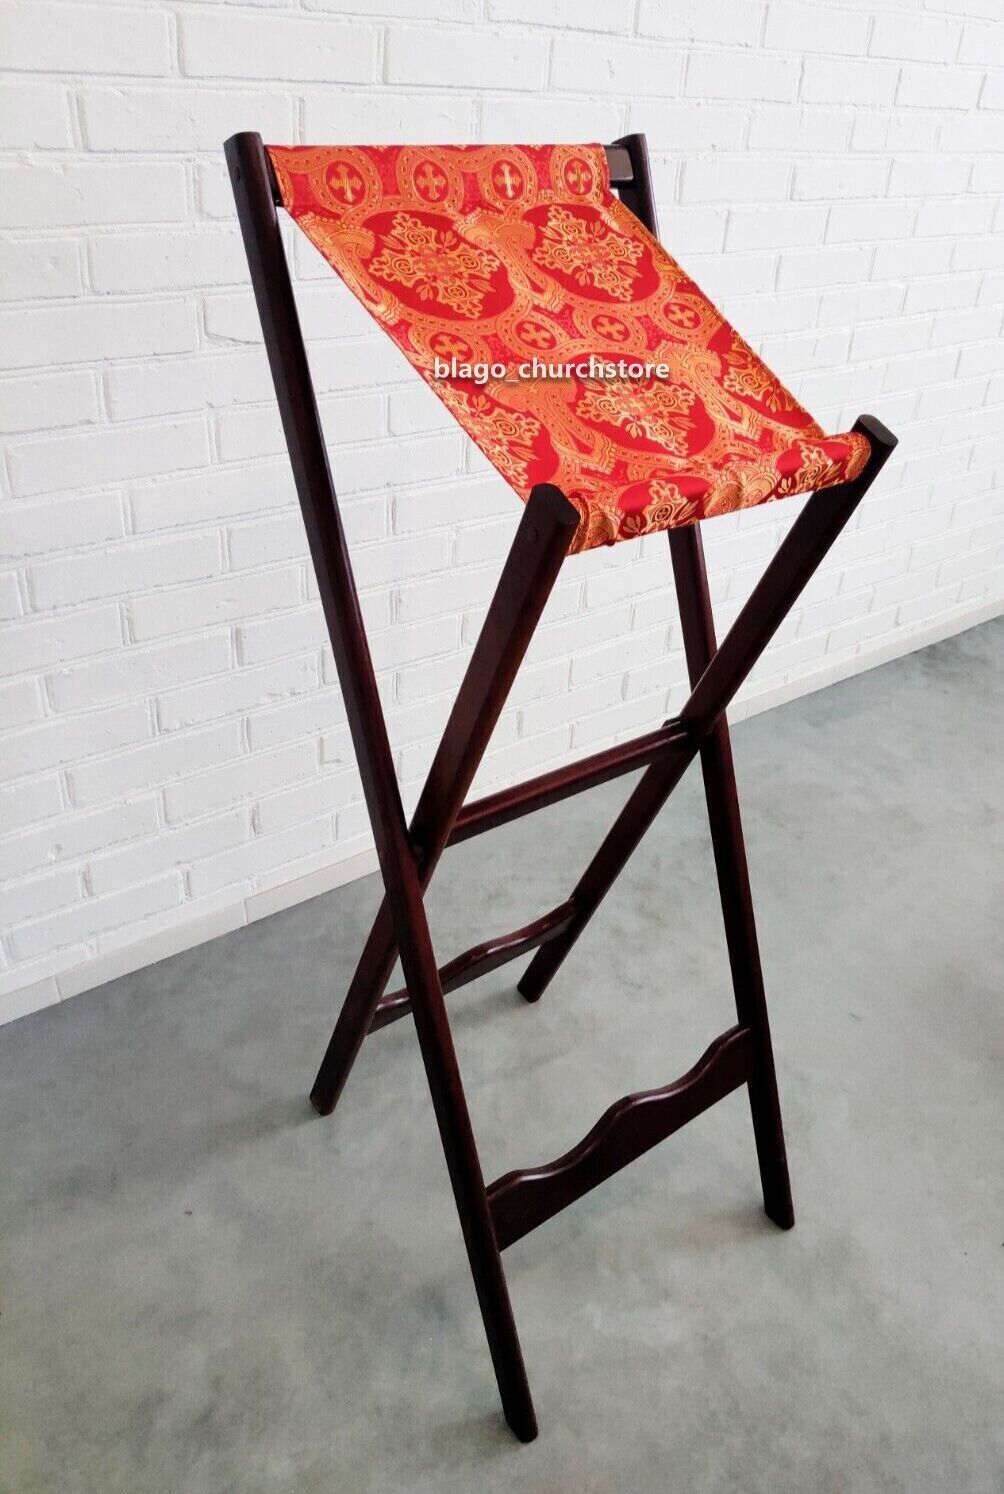 Church Icon Stand Portable Wood Lectern Anologion with Red Fabric